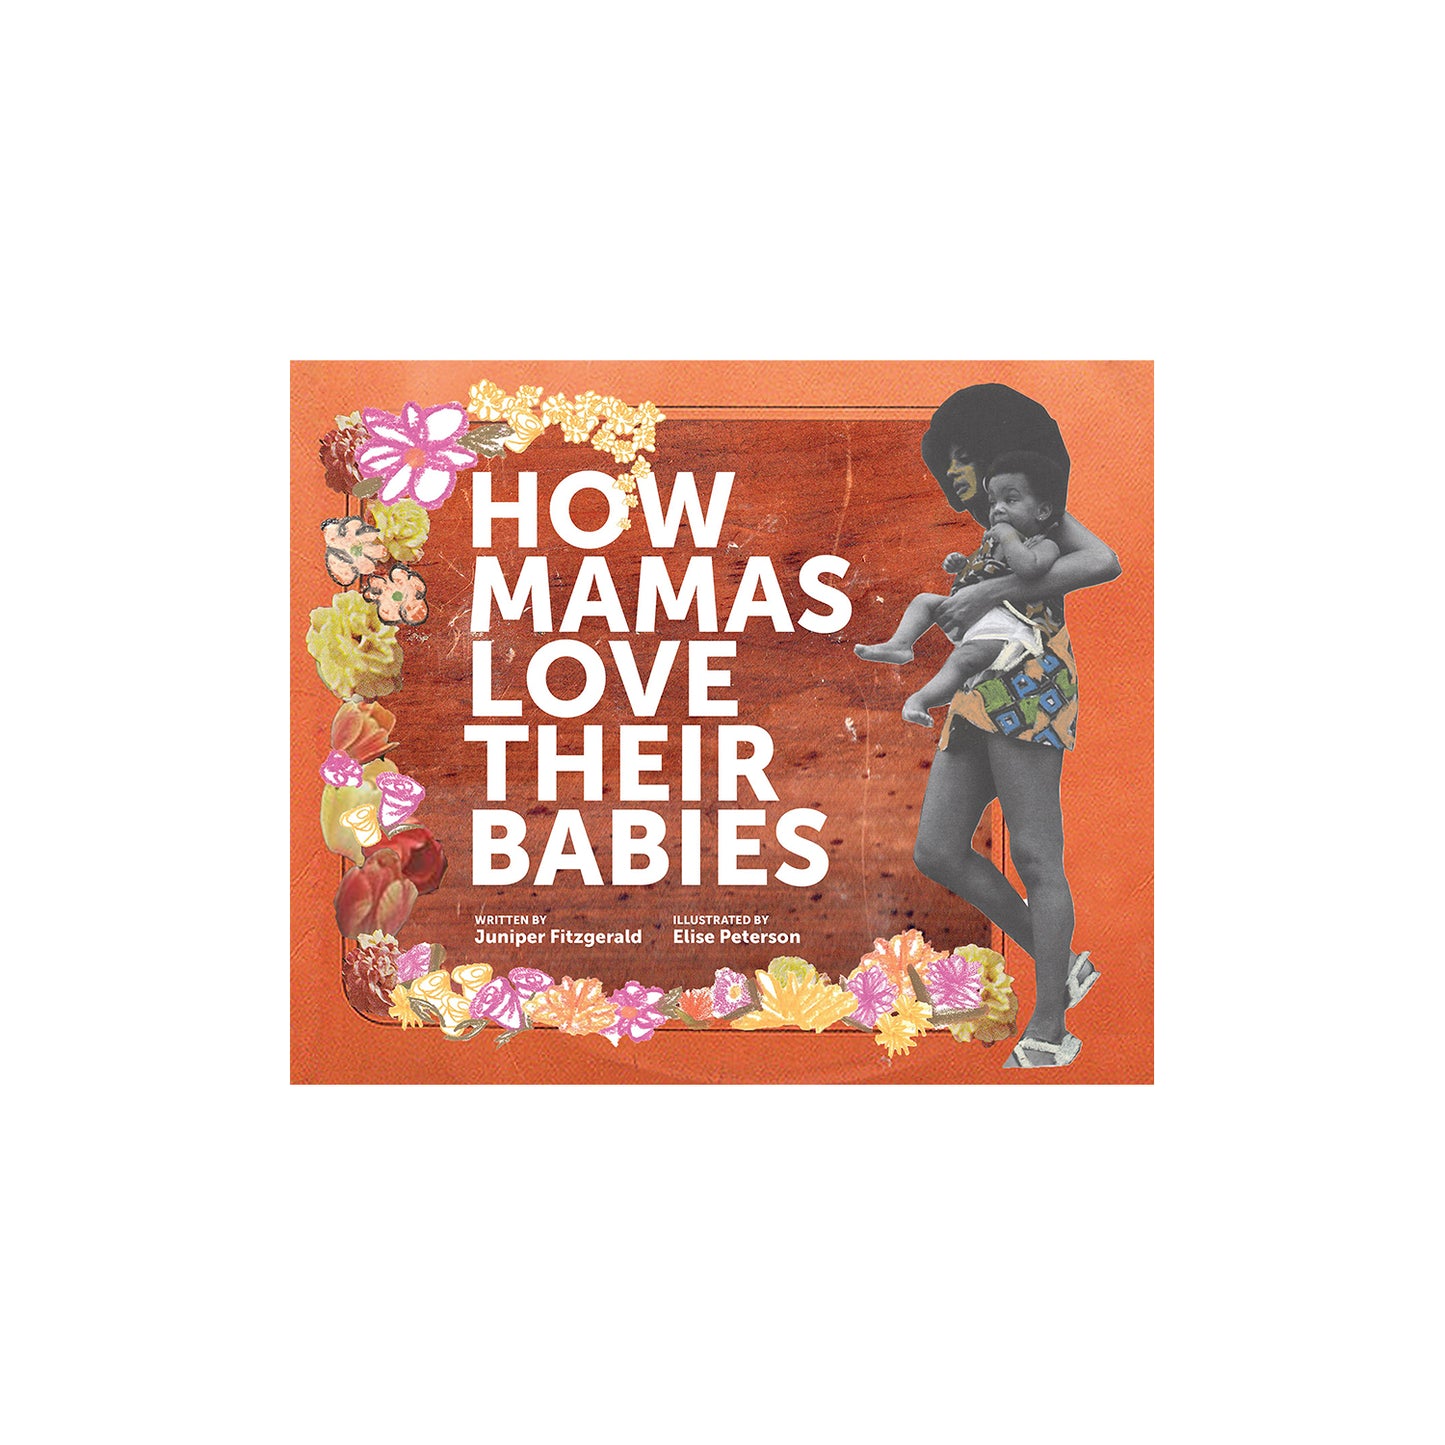 "How Mamas Love Their Babies" by Juniper Fitzgerald and Elise Peterson